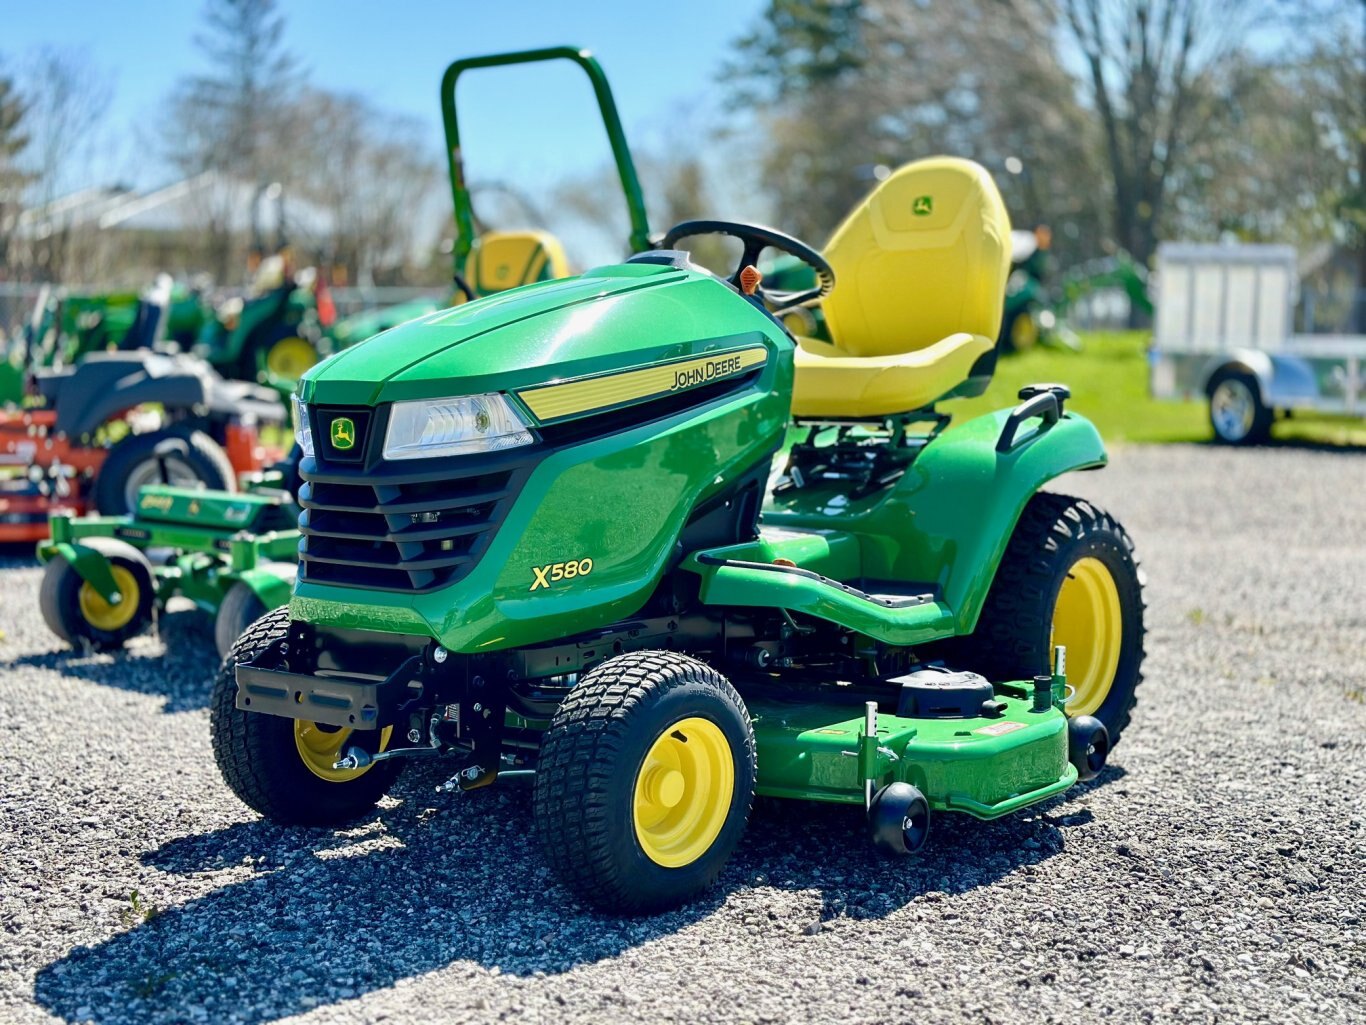 John Deere X580 Lawn Tractor with 54-in. Deck